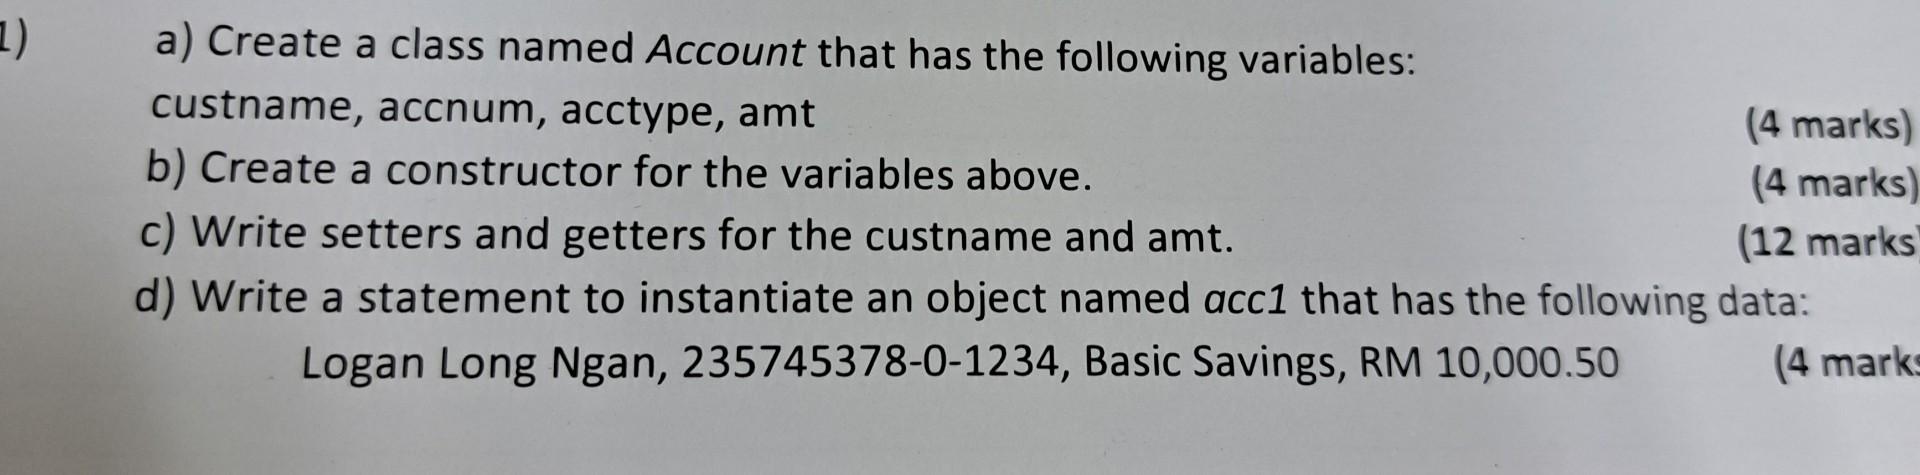 a) Create a class named Account that has the following variables:
custname, accnum, acctype, amt
b) Create a constructor for